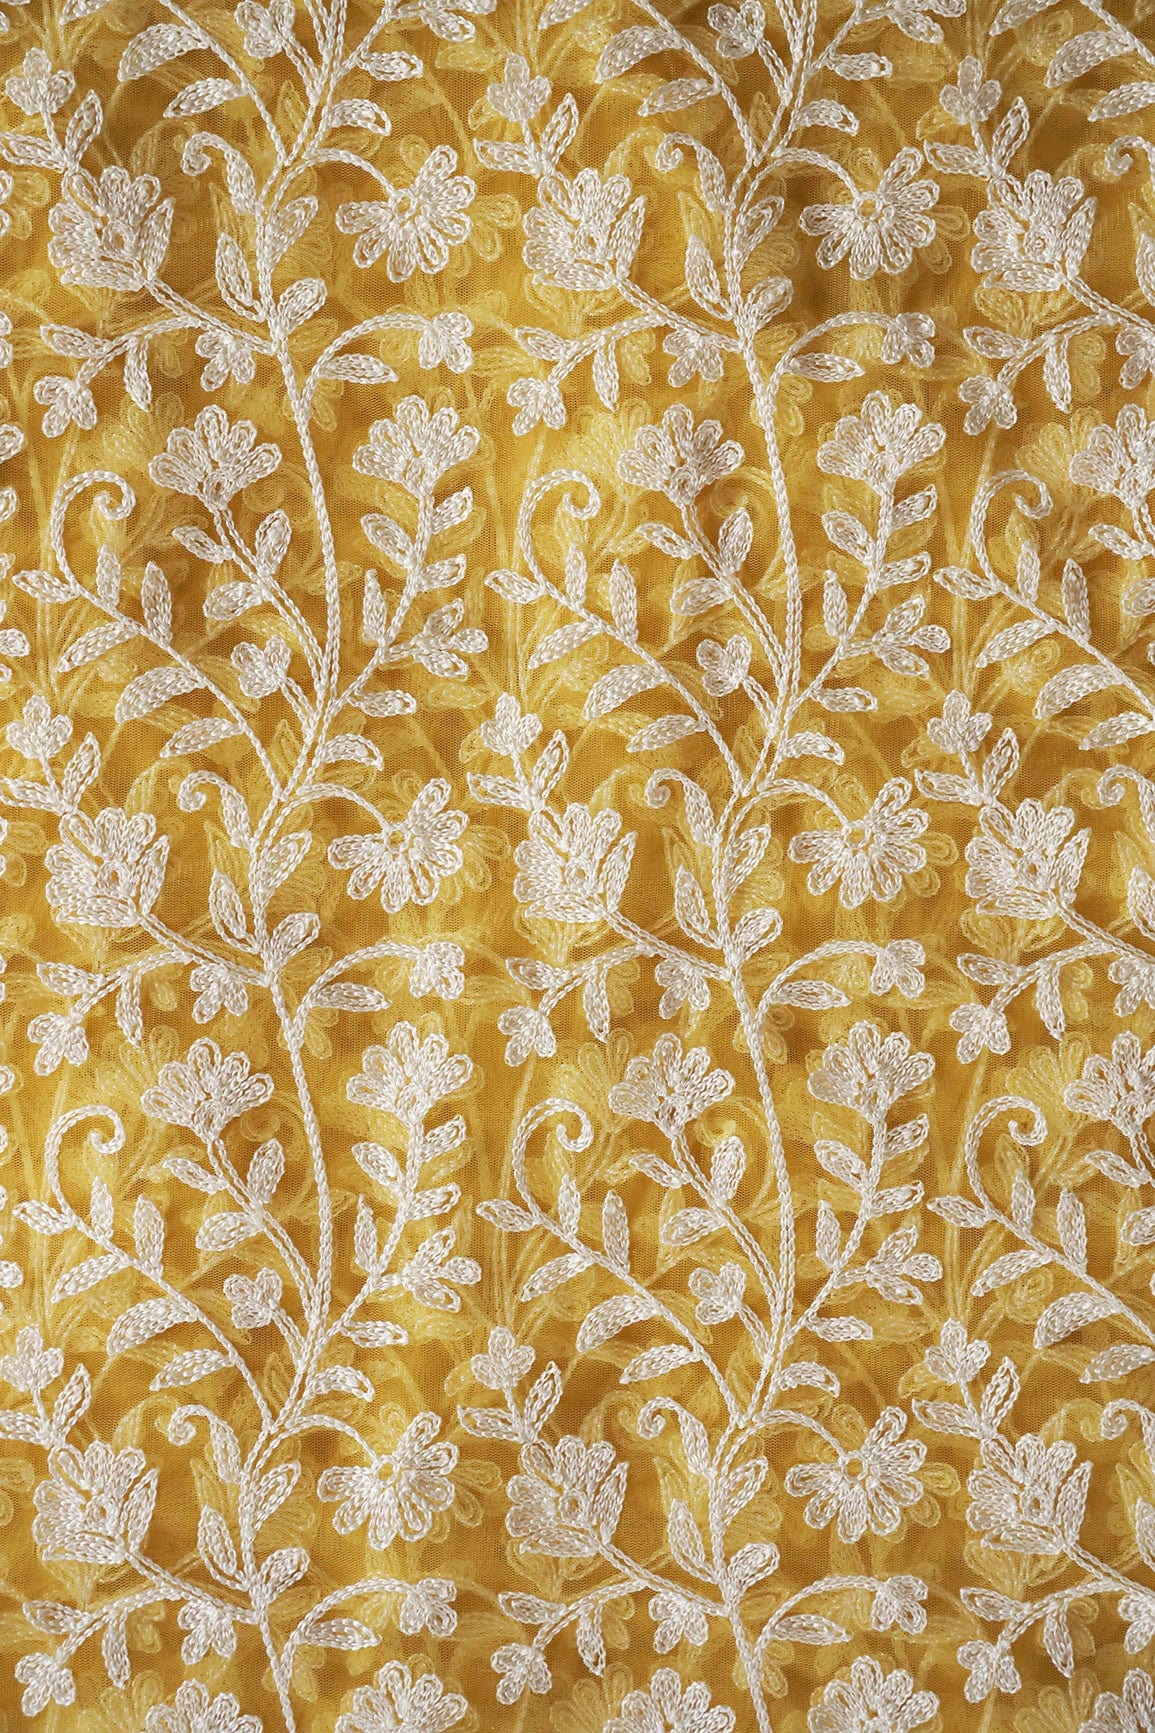 doeraa Embroidery Fabrics Beautiful White Thread Floral Embroidery On Yellow Soft Net Fabric